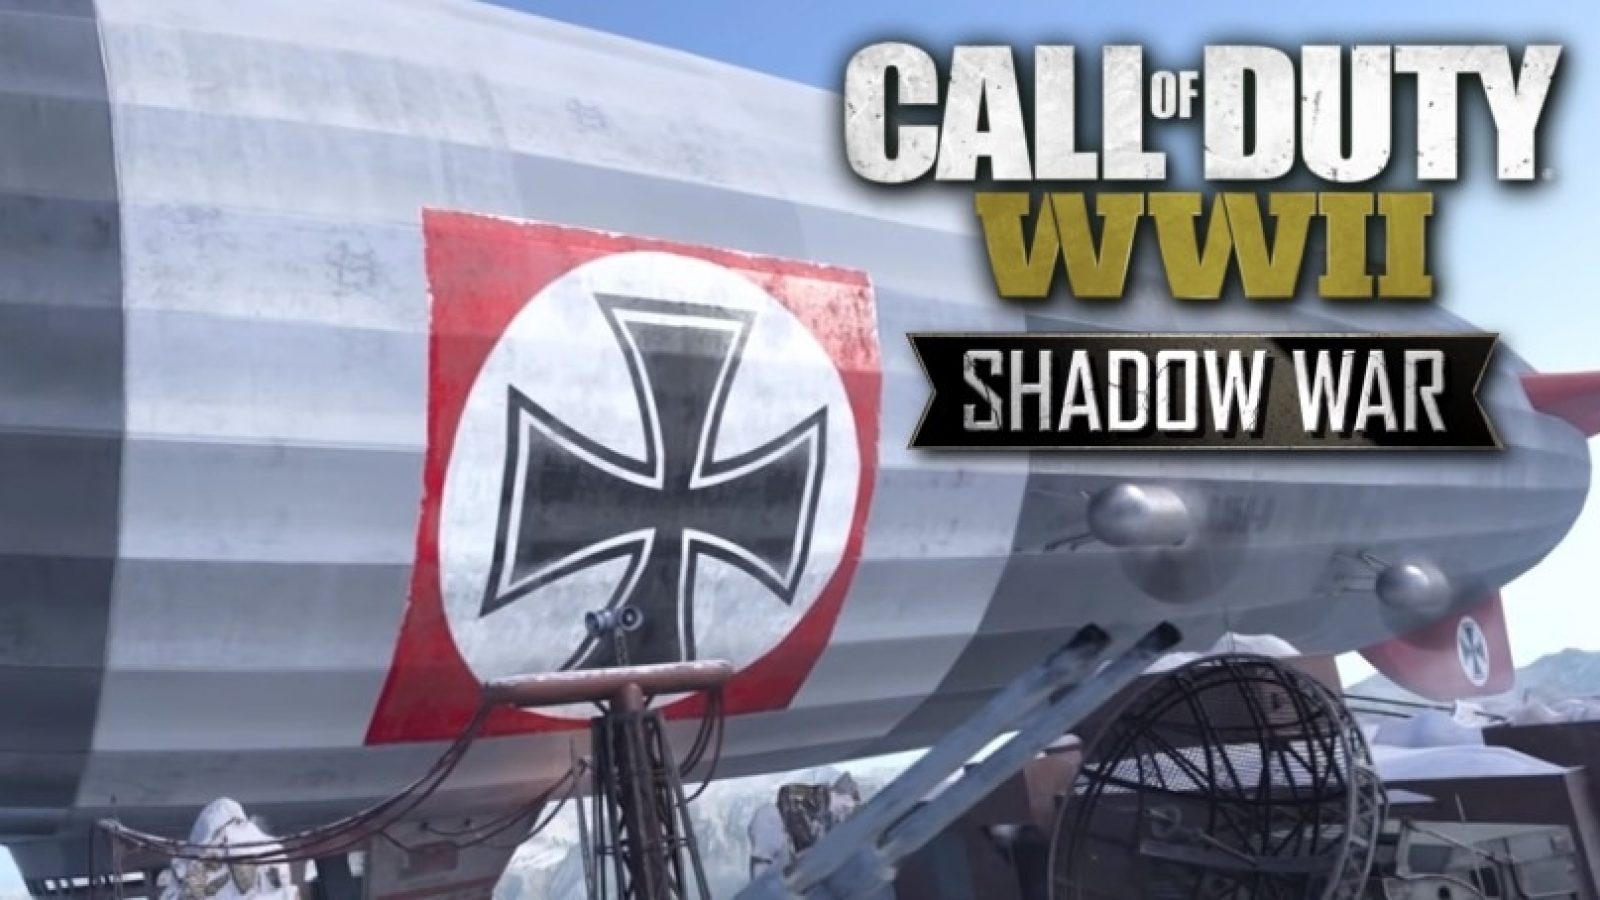 call-of-duty-wwii-shadow-war-dlc-pack-ya-disponible-frikigamers.com